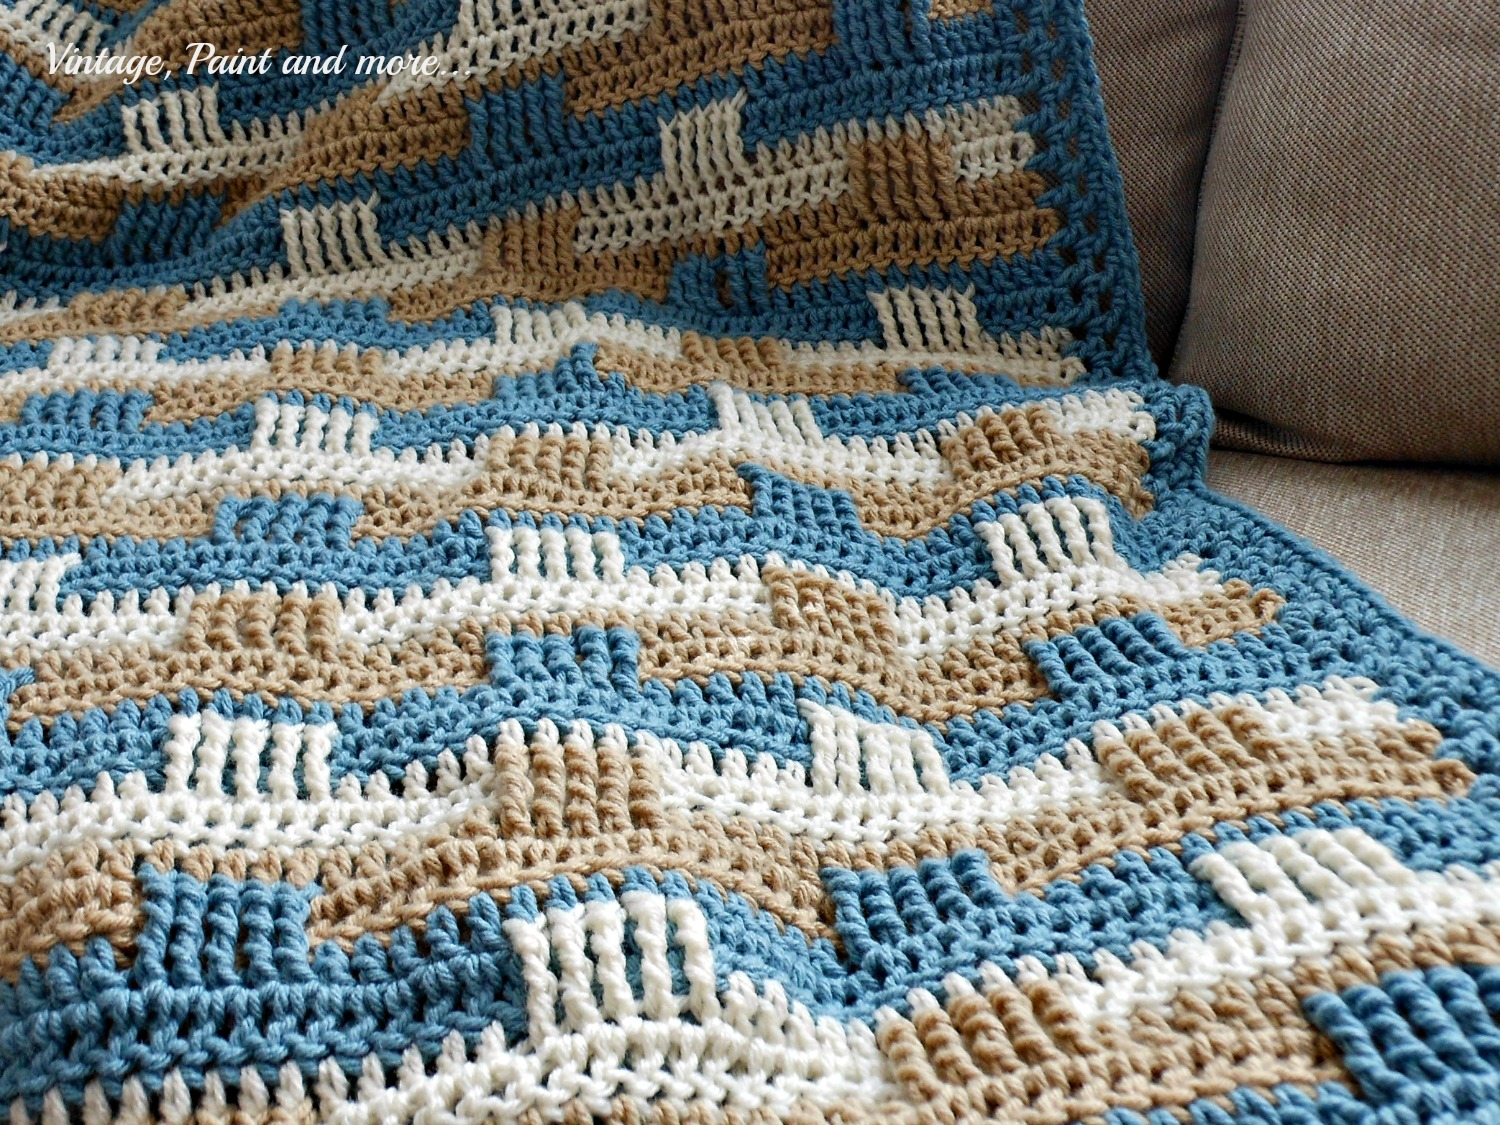 Basket Weave Crochet Pattern Crochet Afghan And Stenciled Pillow Vintage Paint And More